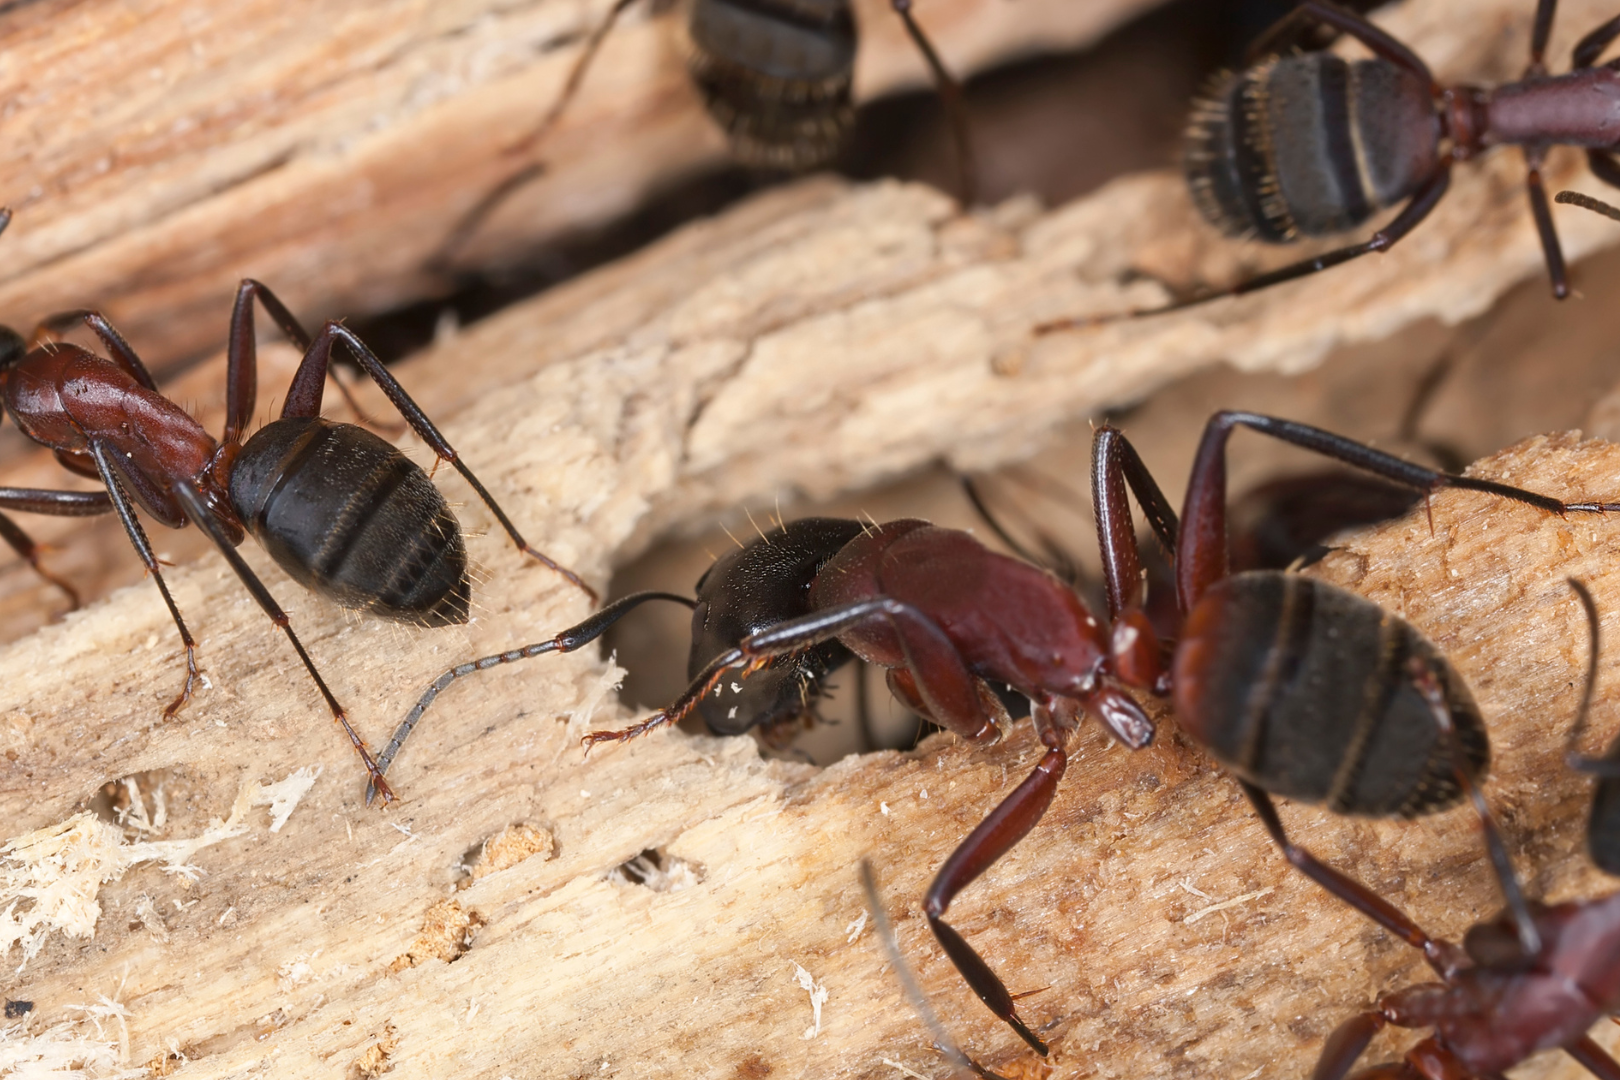 Carpenter ants are common wood-damaging insects, similar to termites